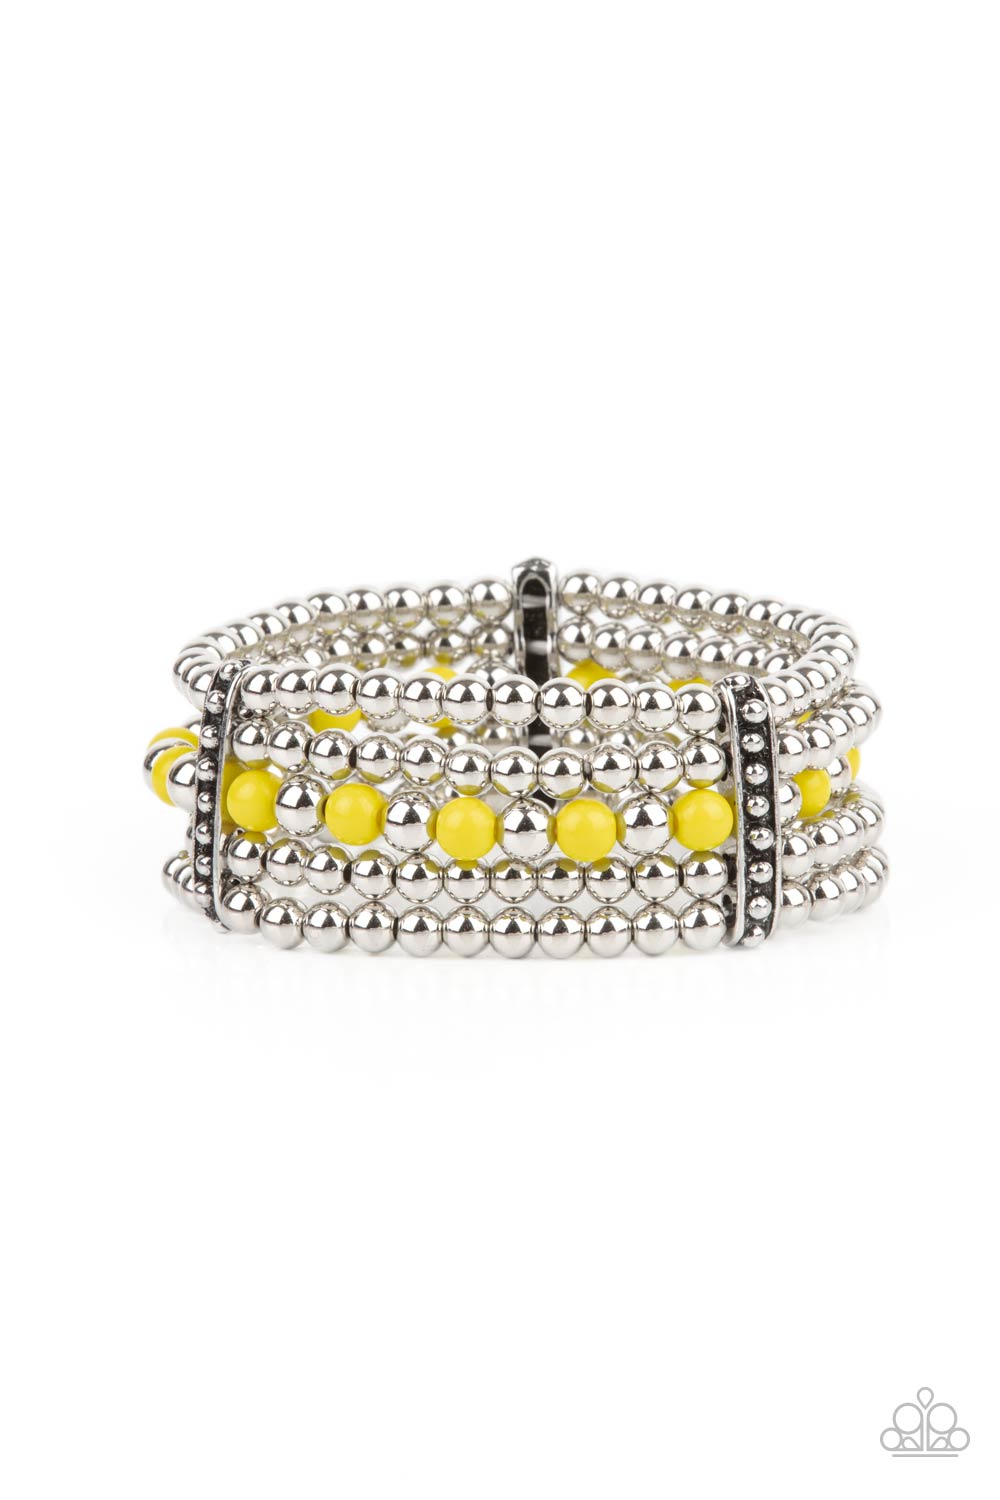 five-dollar-jewelry-gloss-over-the-details-yellow-bracelet-paparazzi-accessories